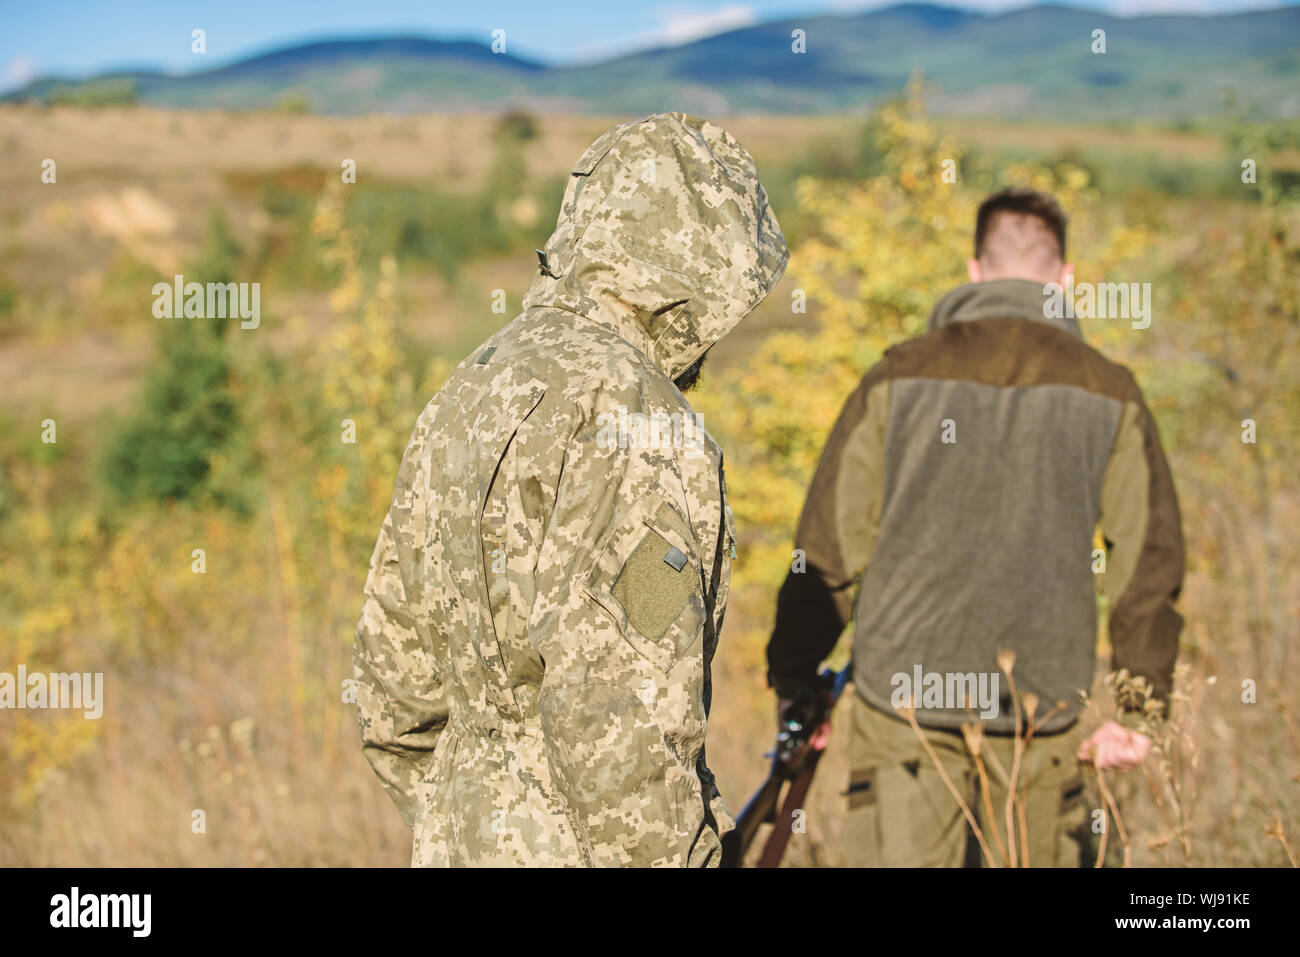 Activity for brutal men. Hunters poachers looking for victim. Poachers with  rifles in nature environment. Illegal hunting. Hunters brutal poachers.  Forbidden hunting. Breaking law. Poaching concept Stock Photo - Alamy